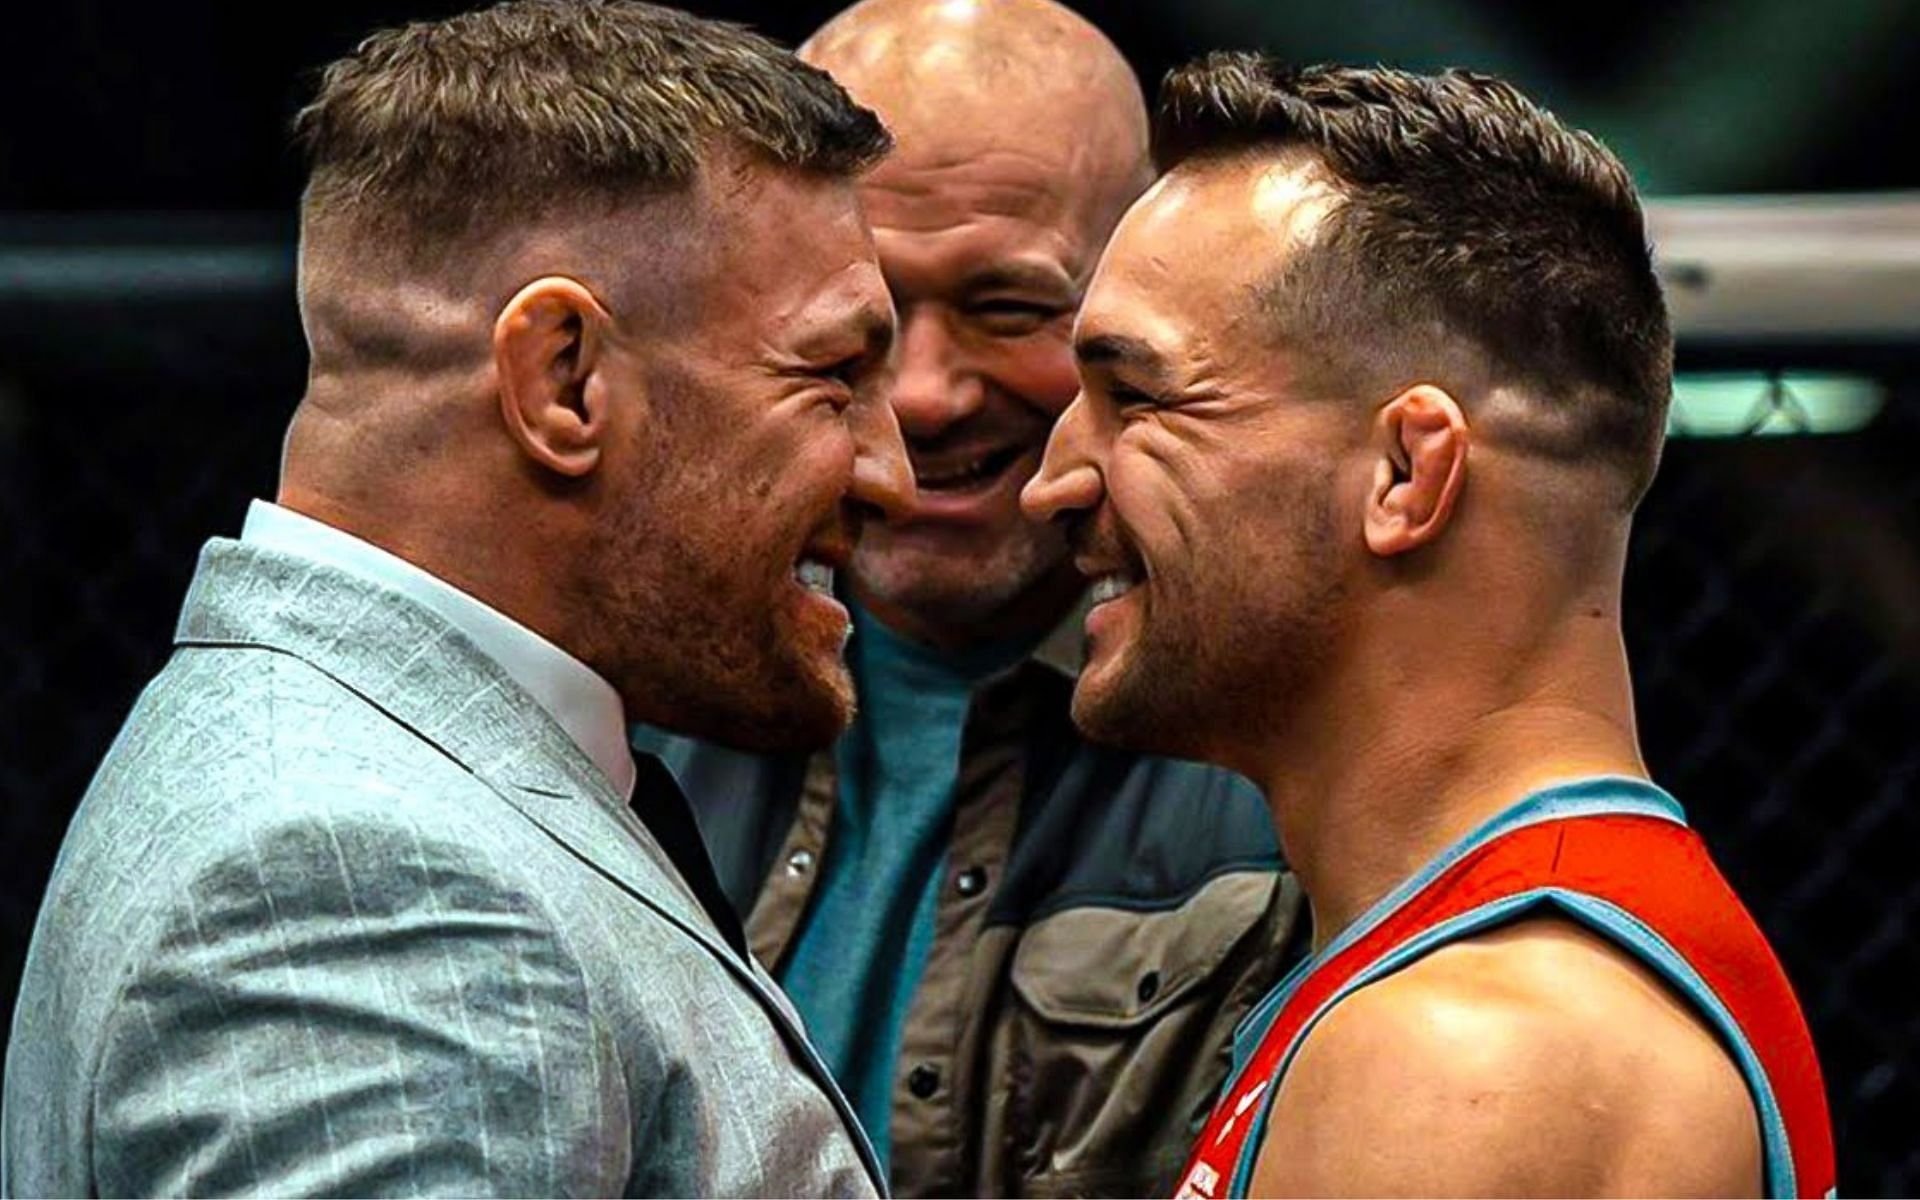 Conor McGregor facing off with Michael Chandler (Image Courtesy - UFC Official YouTube Channel)